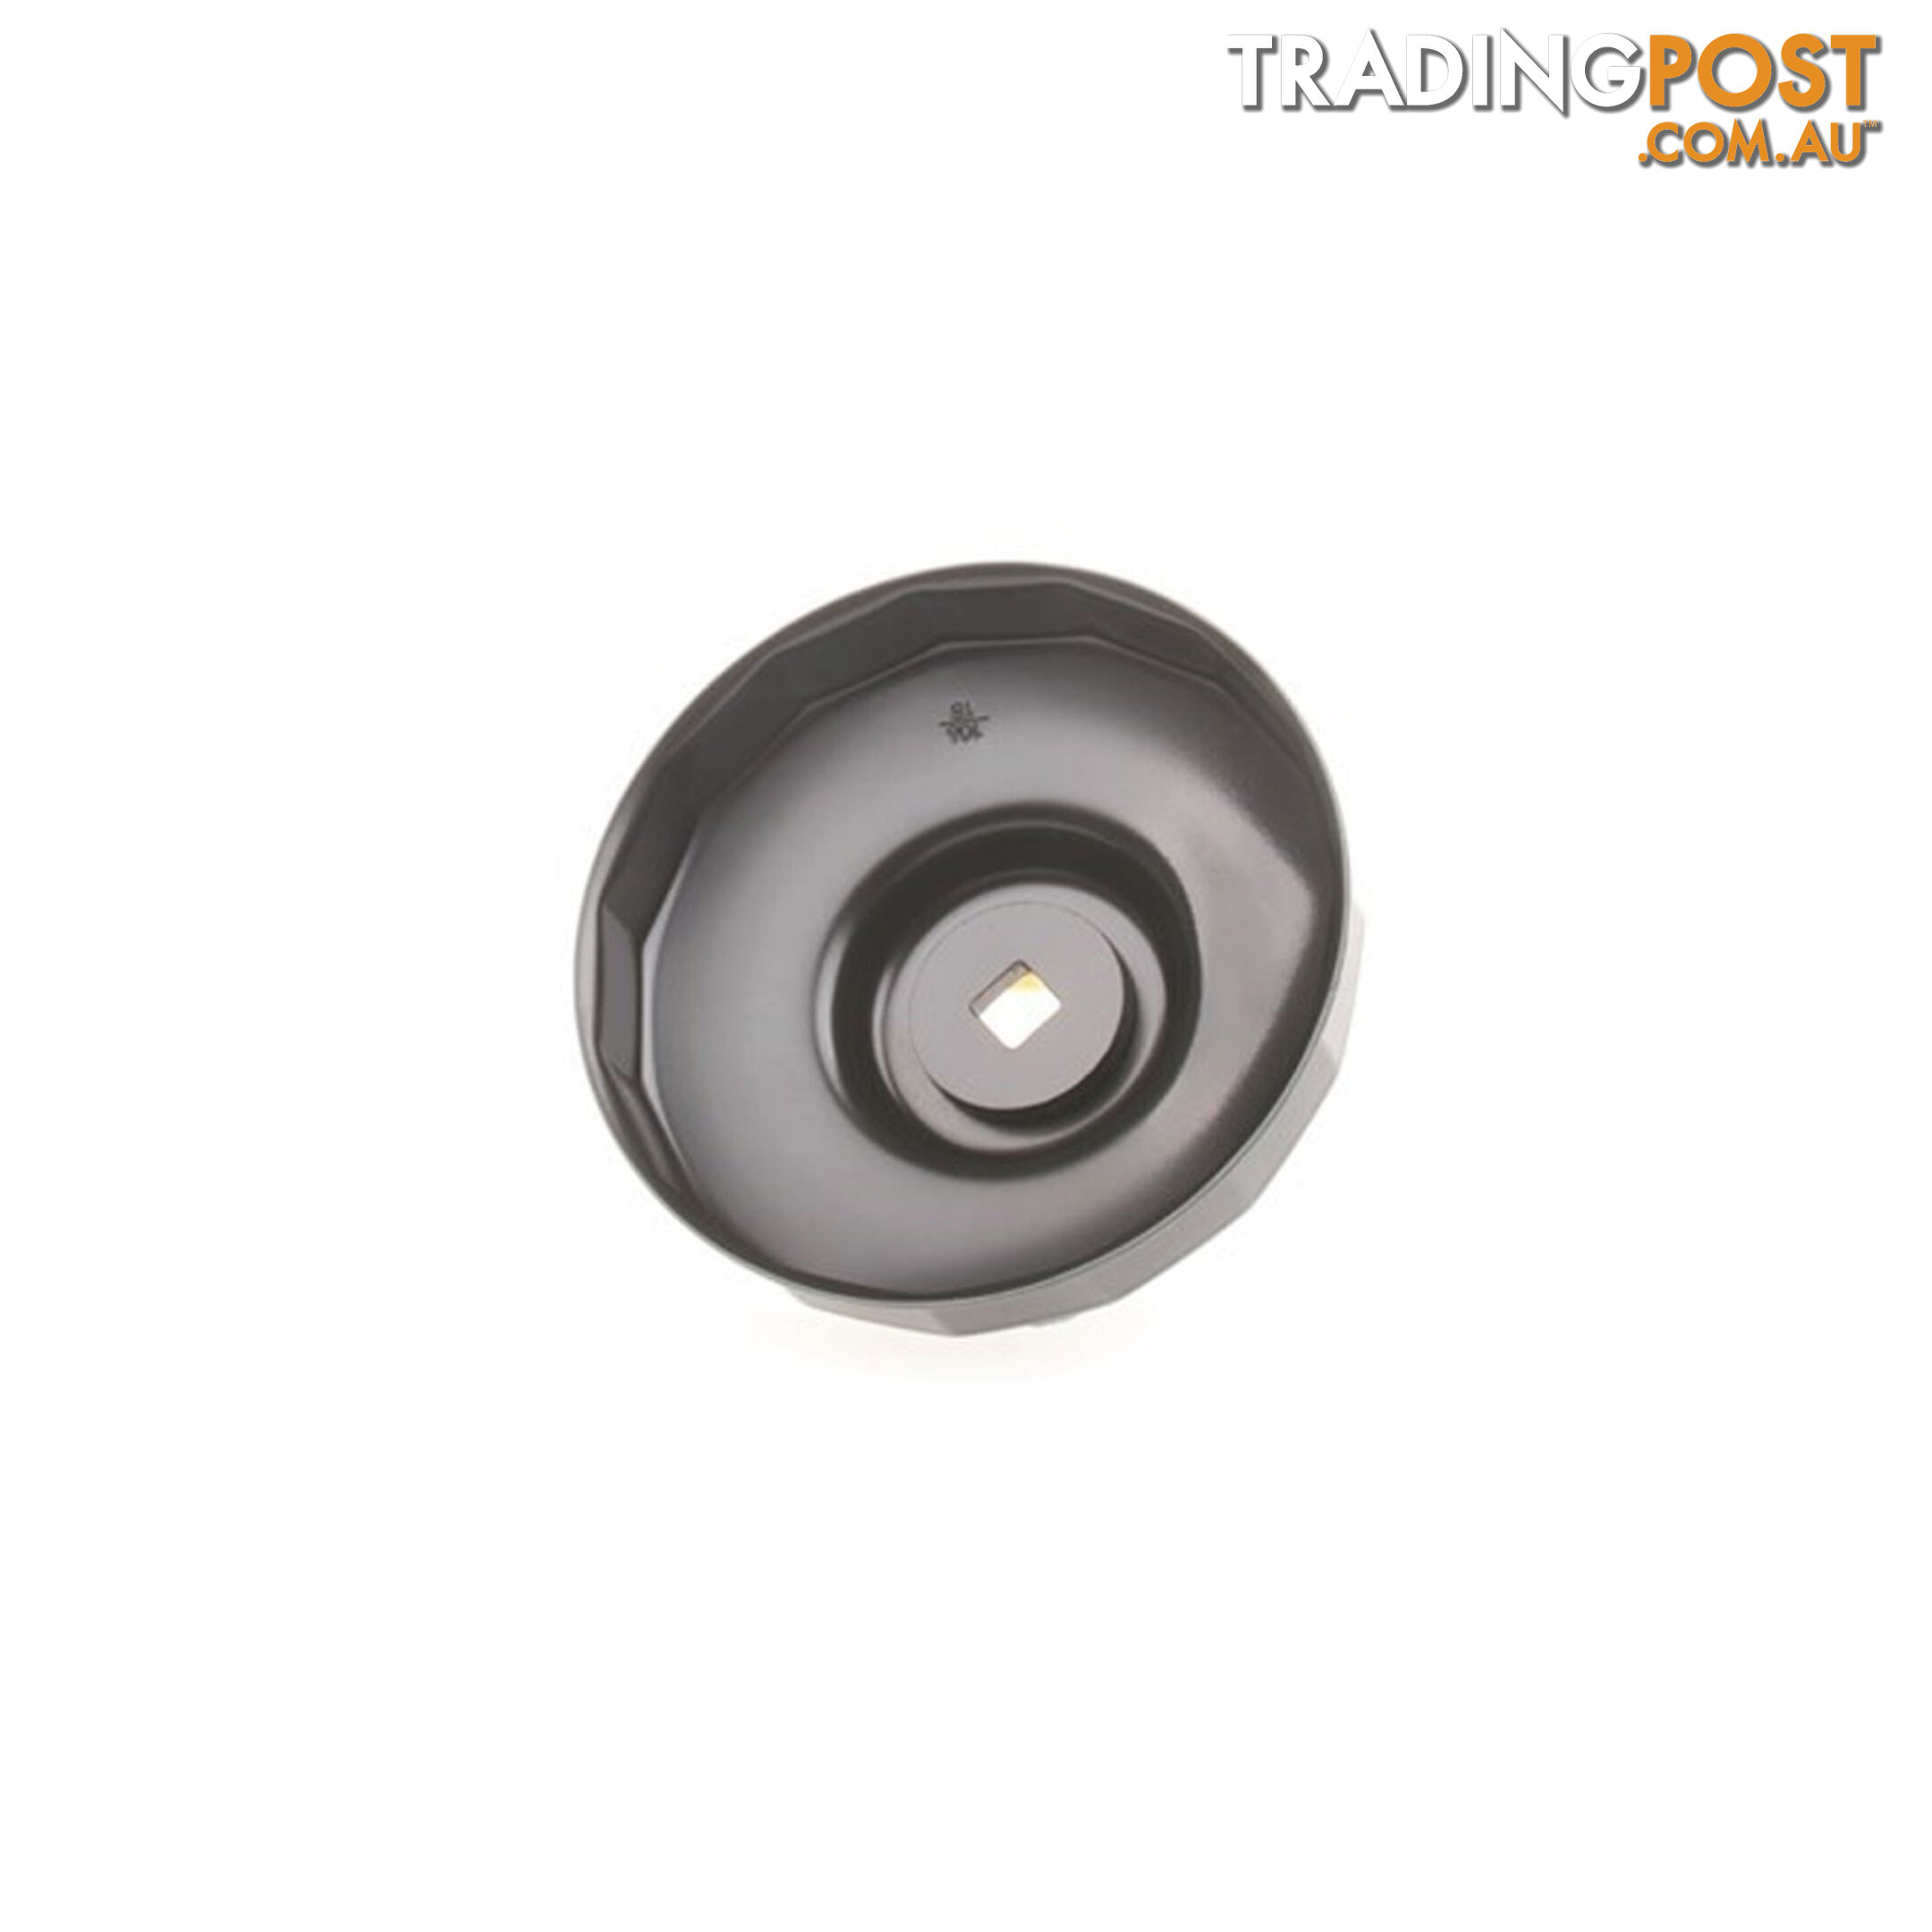 Toledo Oil Filter Cup Wrench Alloy  - 64mm 14 Flutes SKU - 305901